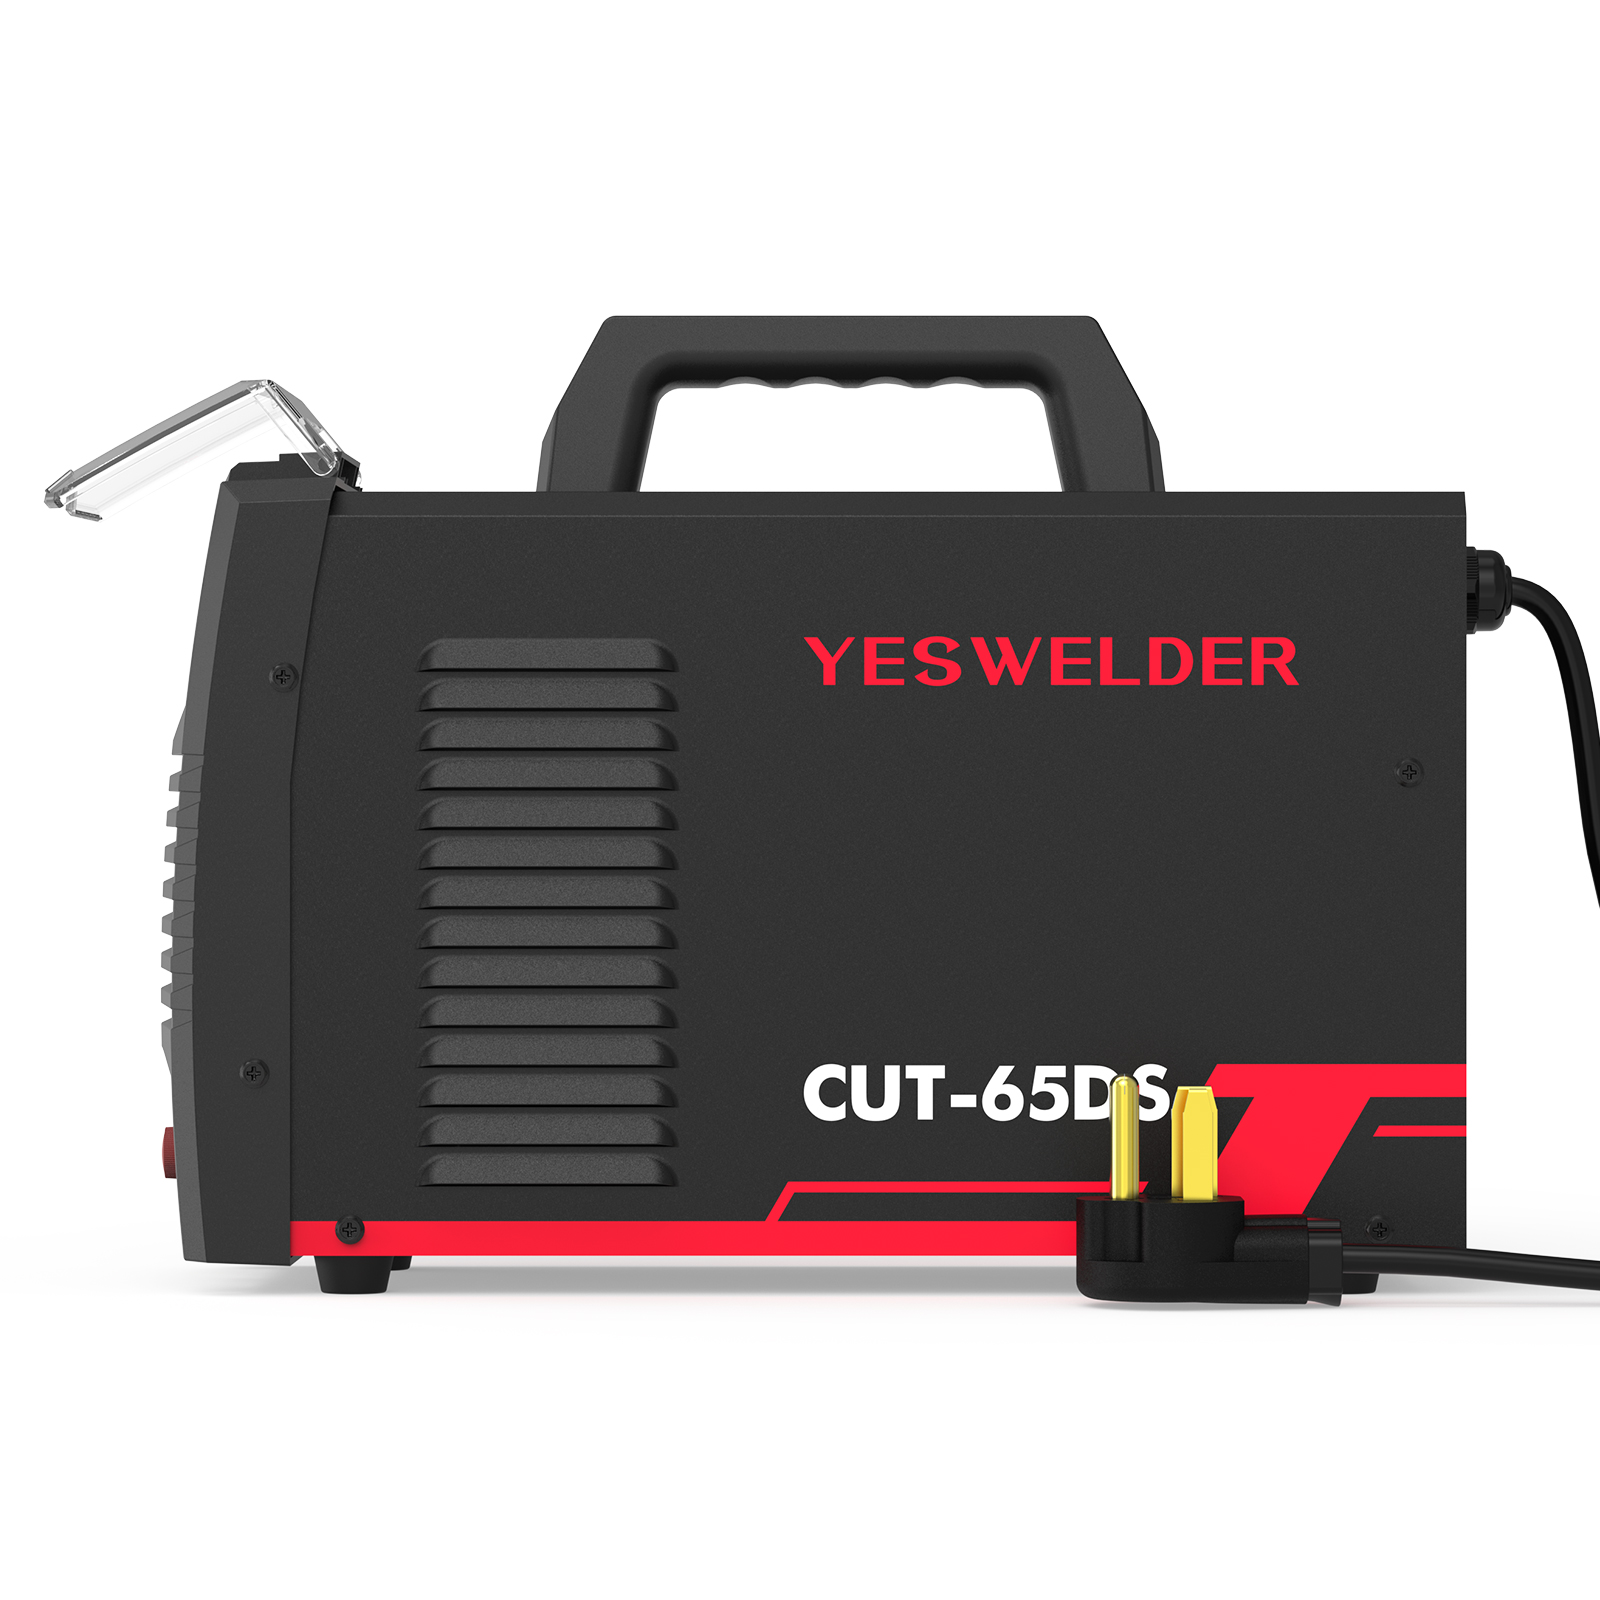 YESWELDER CUT-65DS, 65 Amp Non High Frequency Non-Touch Pilot Arc Digital Plasma  Cutter, DC Inverter 110/220V Dual Voltage Cutting Machine New model 